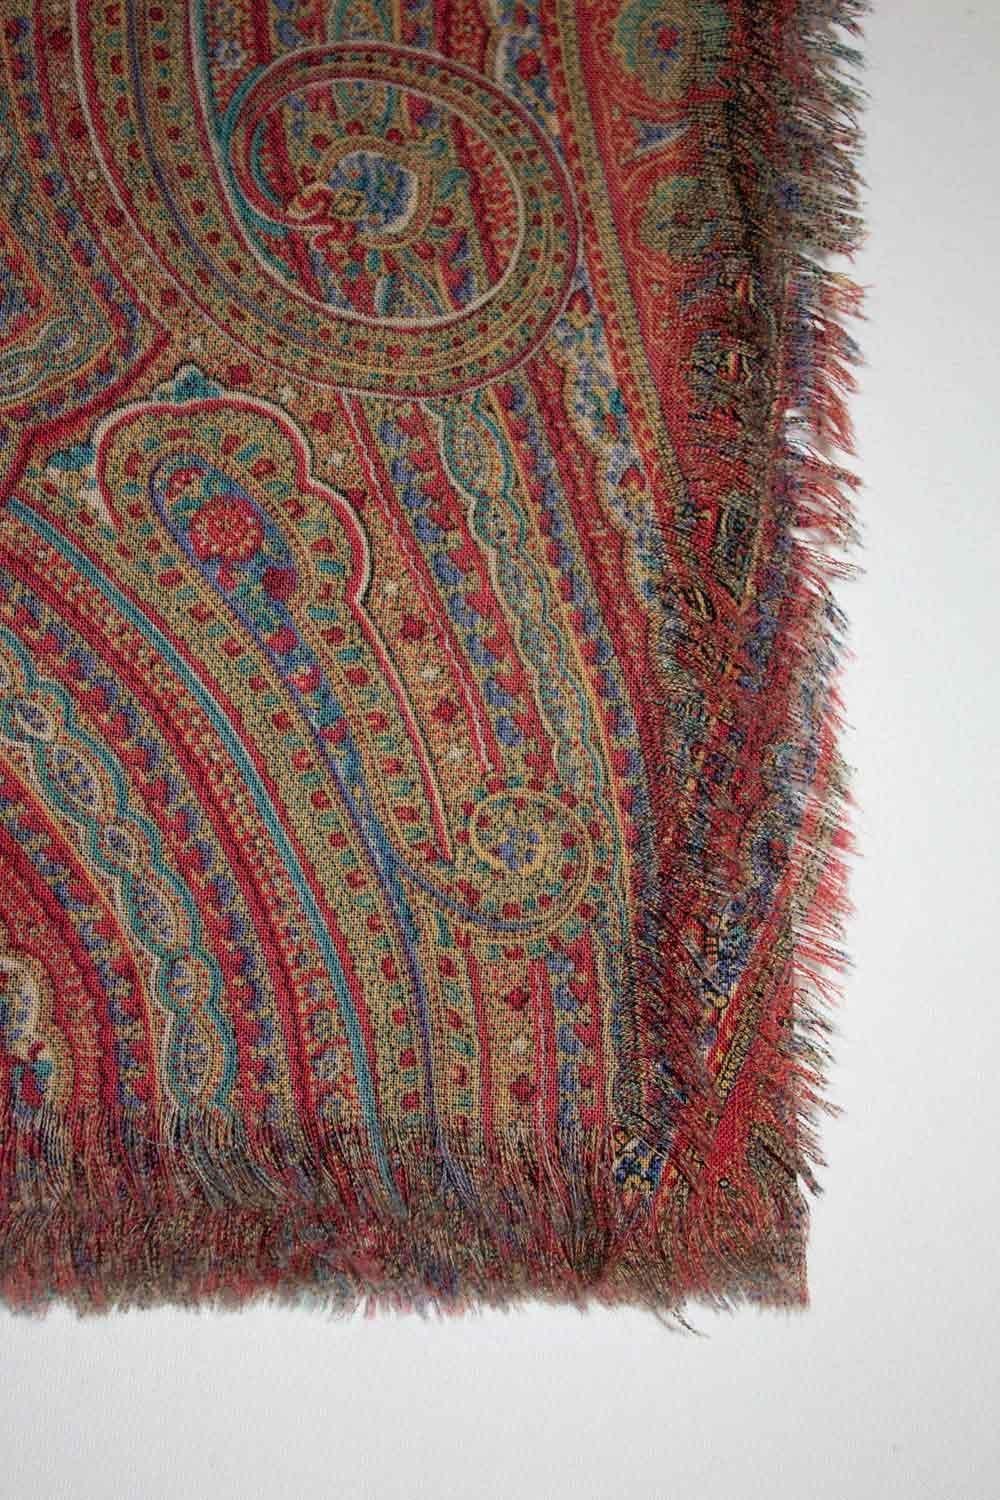 A wonderful vintage wool shawl by Liberty of London. The scarf  is in a red , turquoise, and blue paisley print with fringing at the ends . 100 % wool, made in England. Measurements: 53'' x 51''